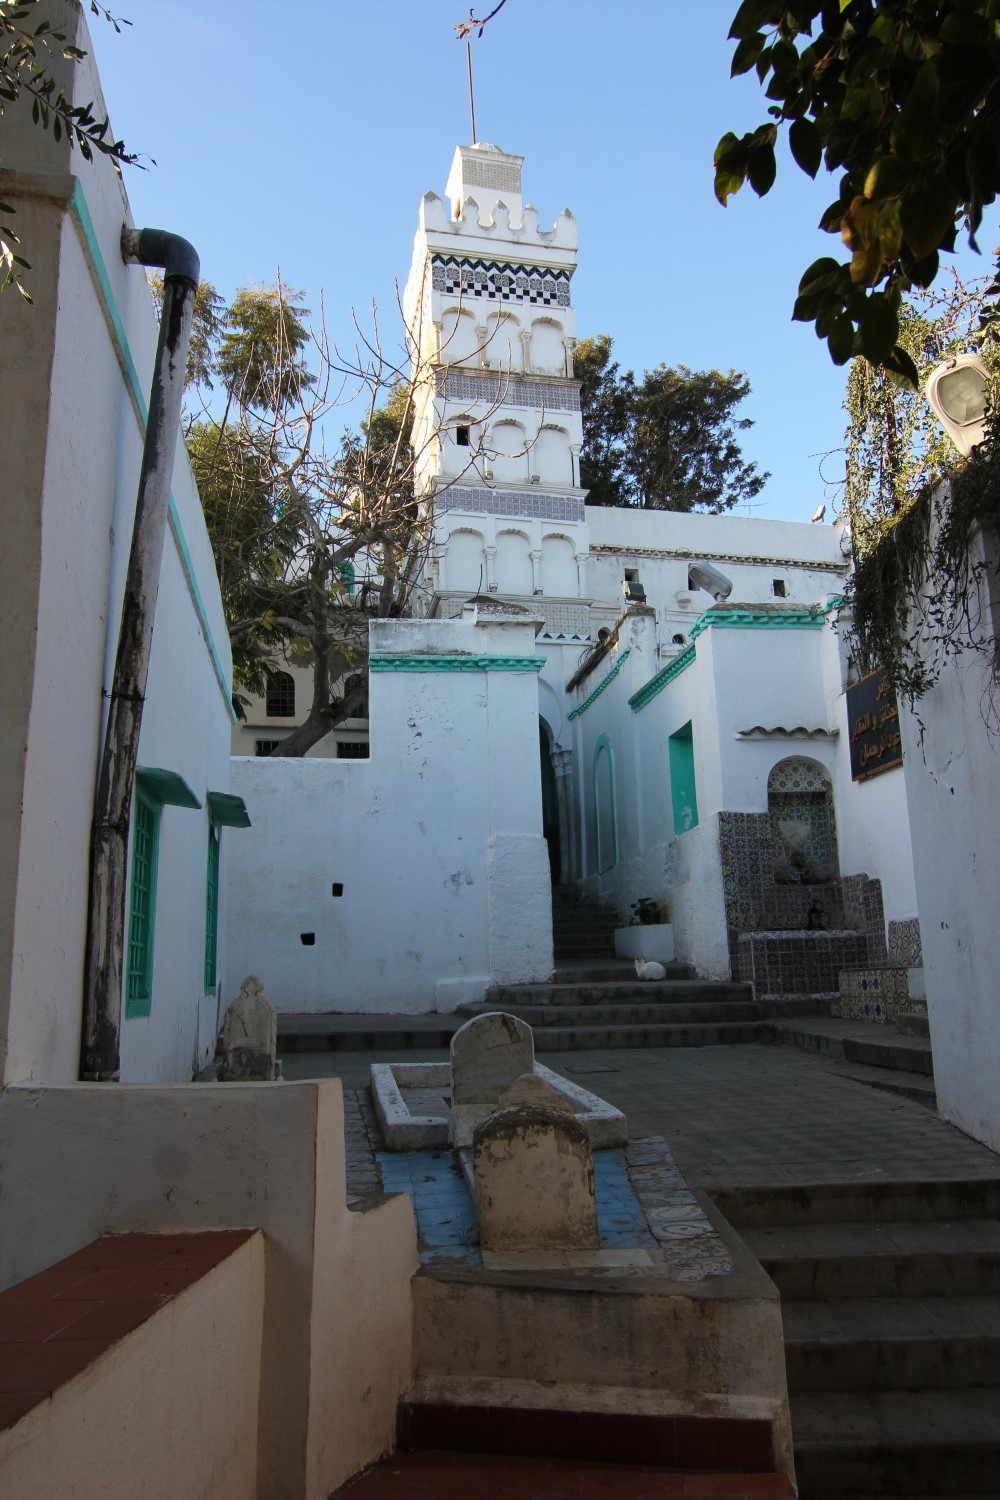 General view of the minaret showing tombs in the foreground